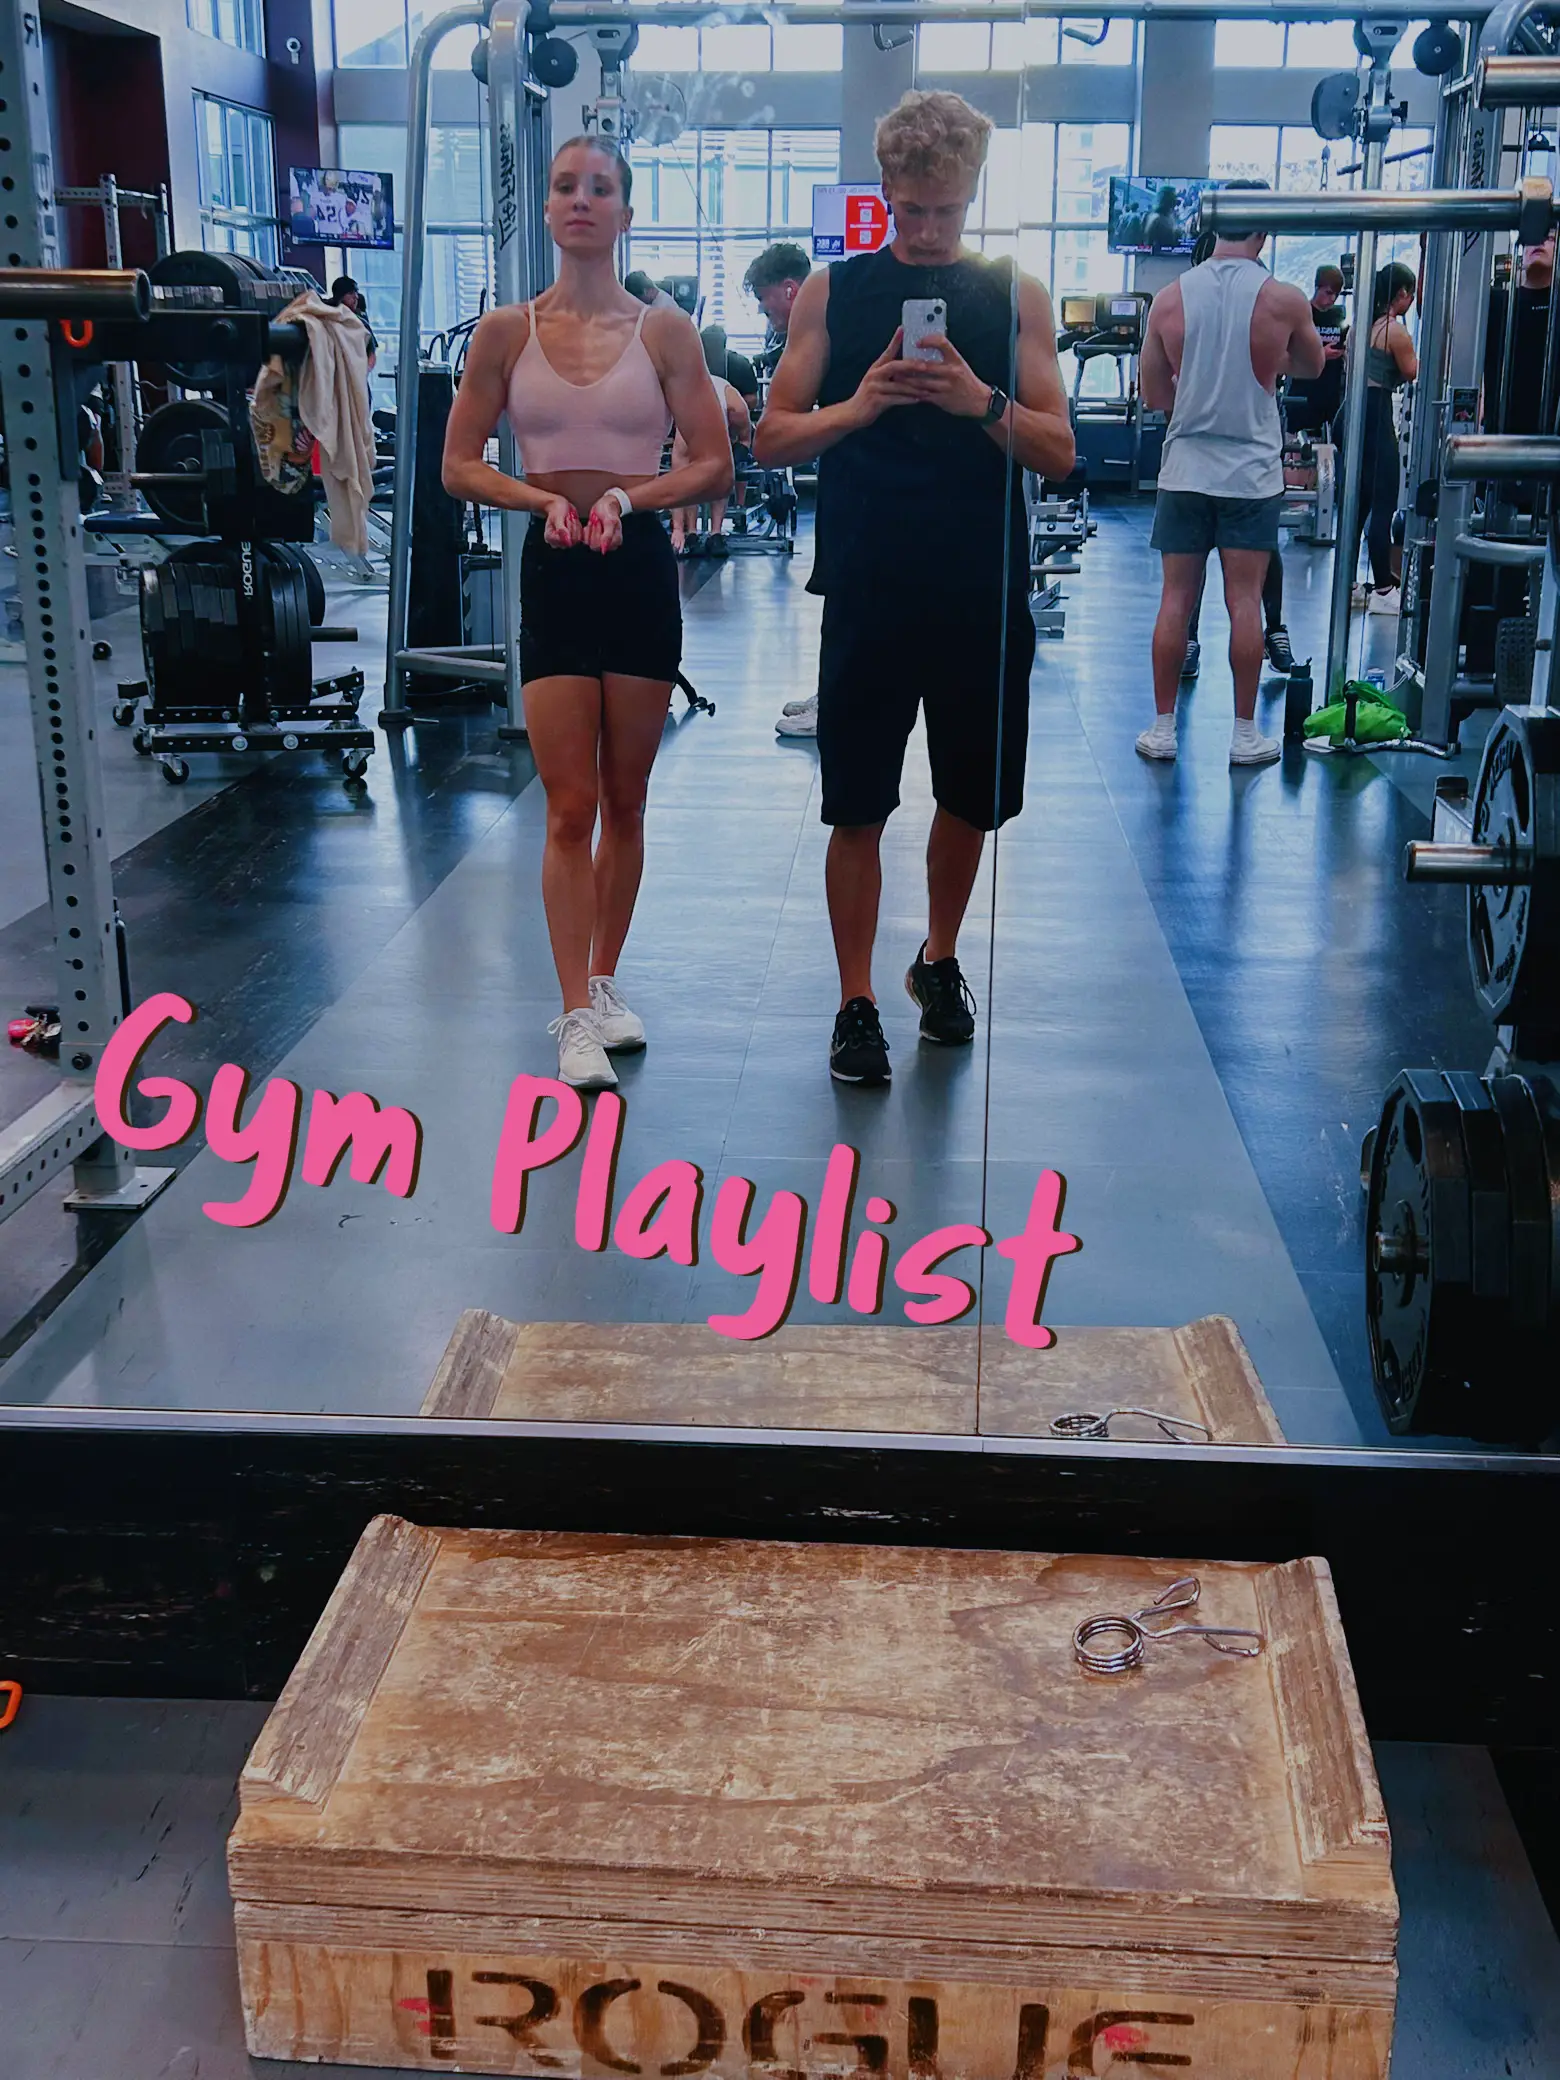 GYM RAT PLAYLIST 🎵, Gallery posted by Jordynt_fit